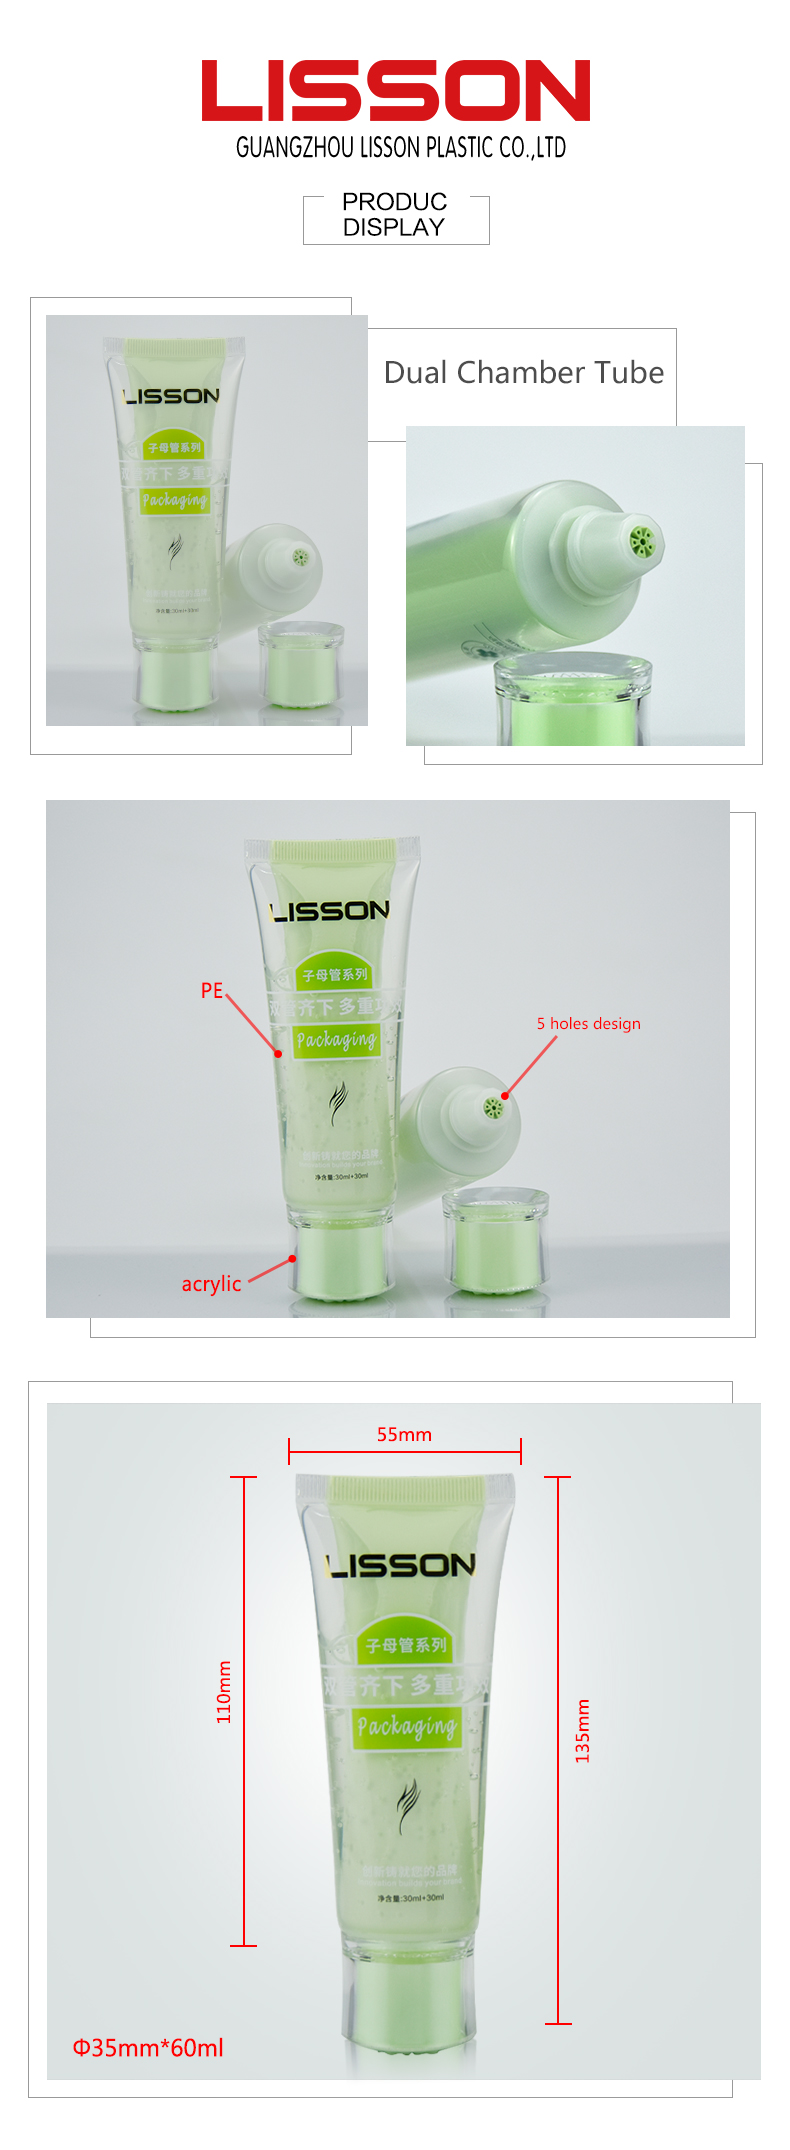 Dual Chamber Tube for Lotion